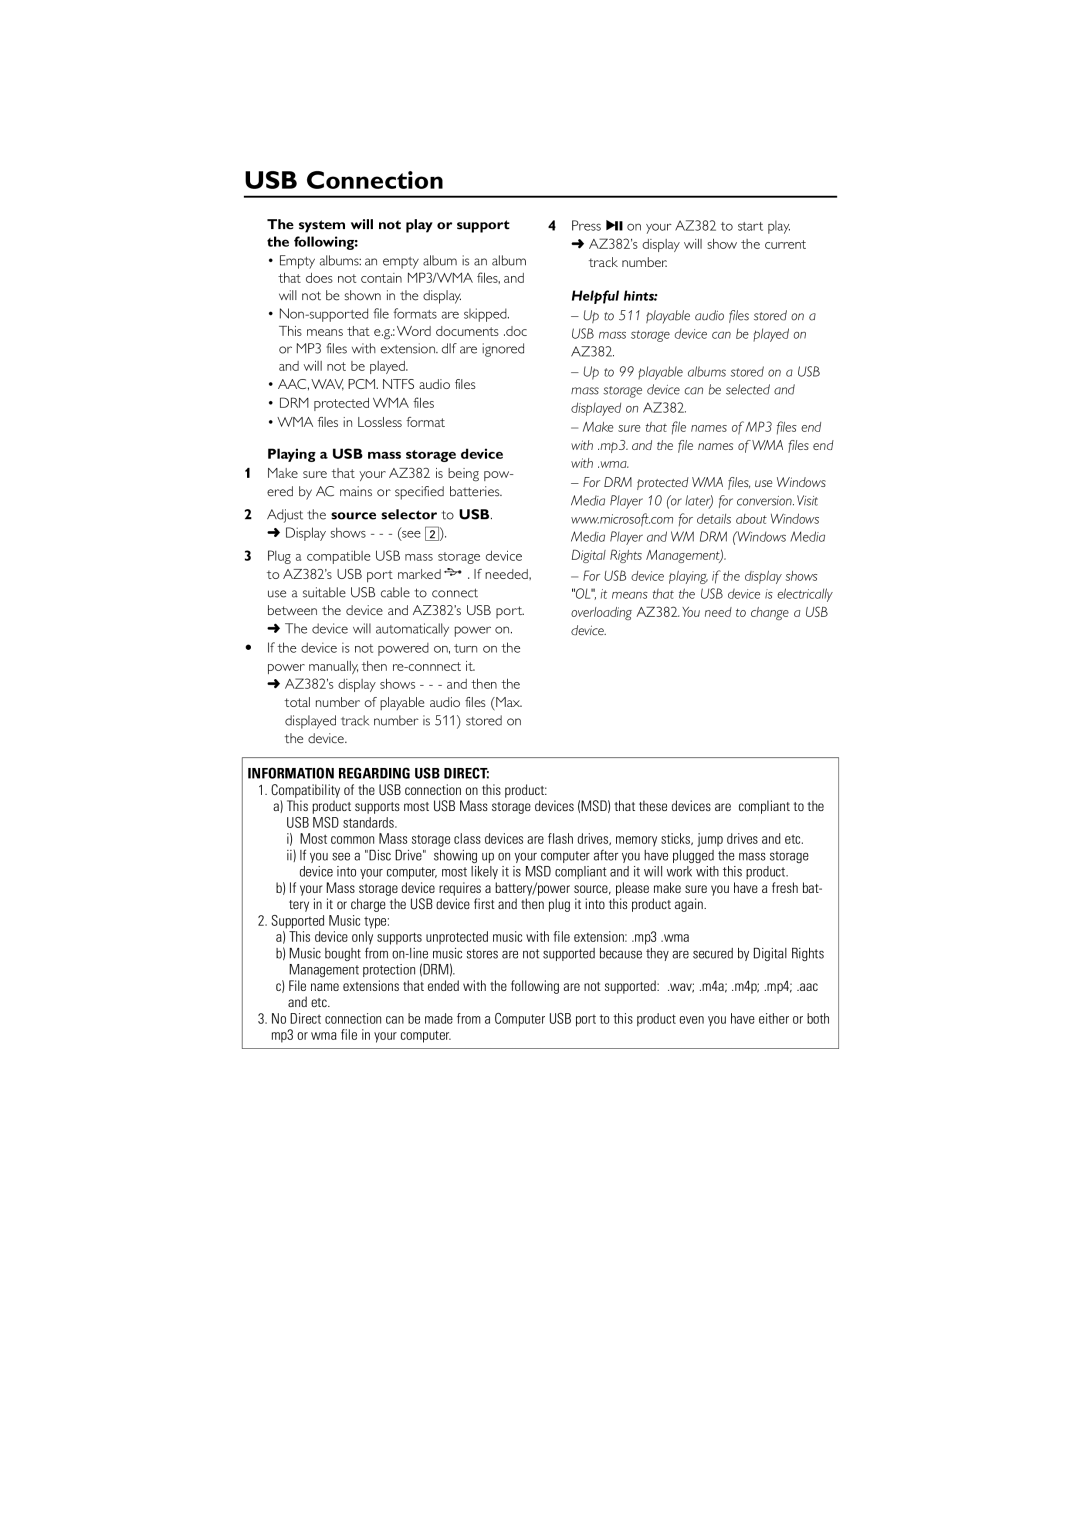 Philips AZ382 user manual USB Connection, The system will not play or support, the following, Helpful hints 